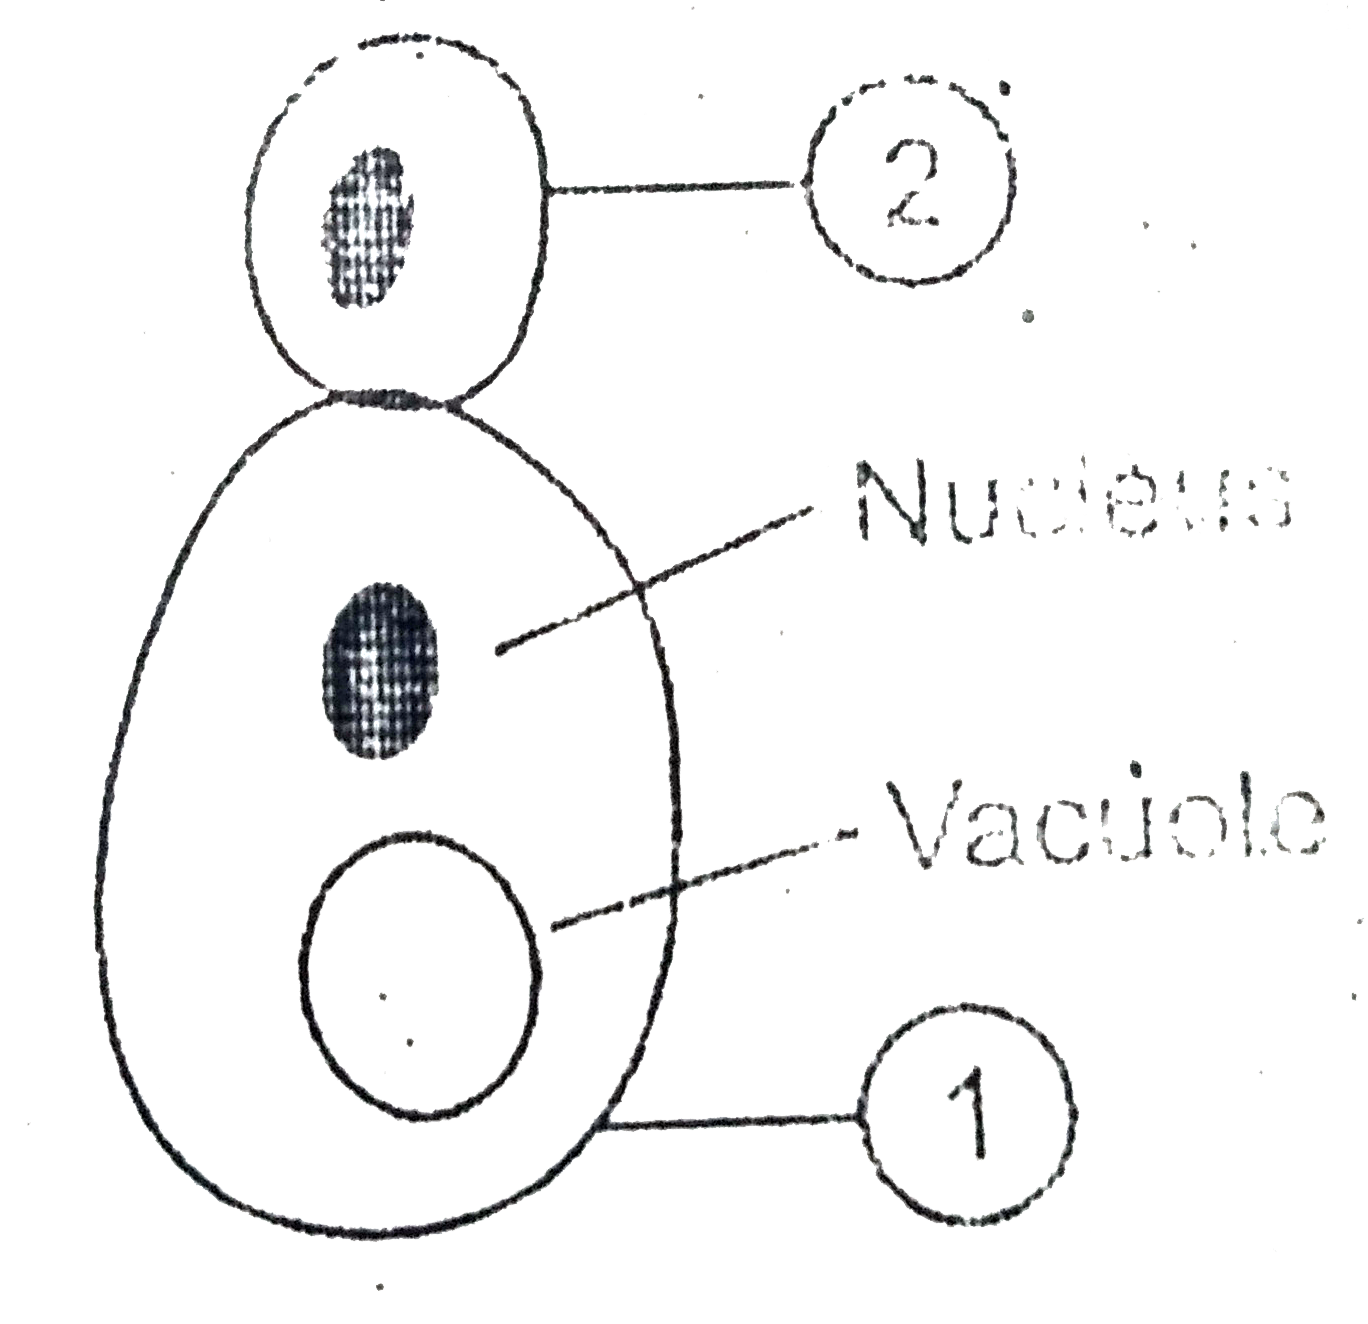 Label is the parts (1) and (2) in budding of yeast cell.